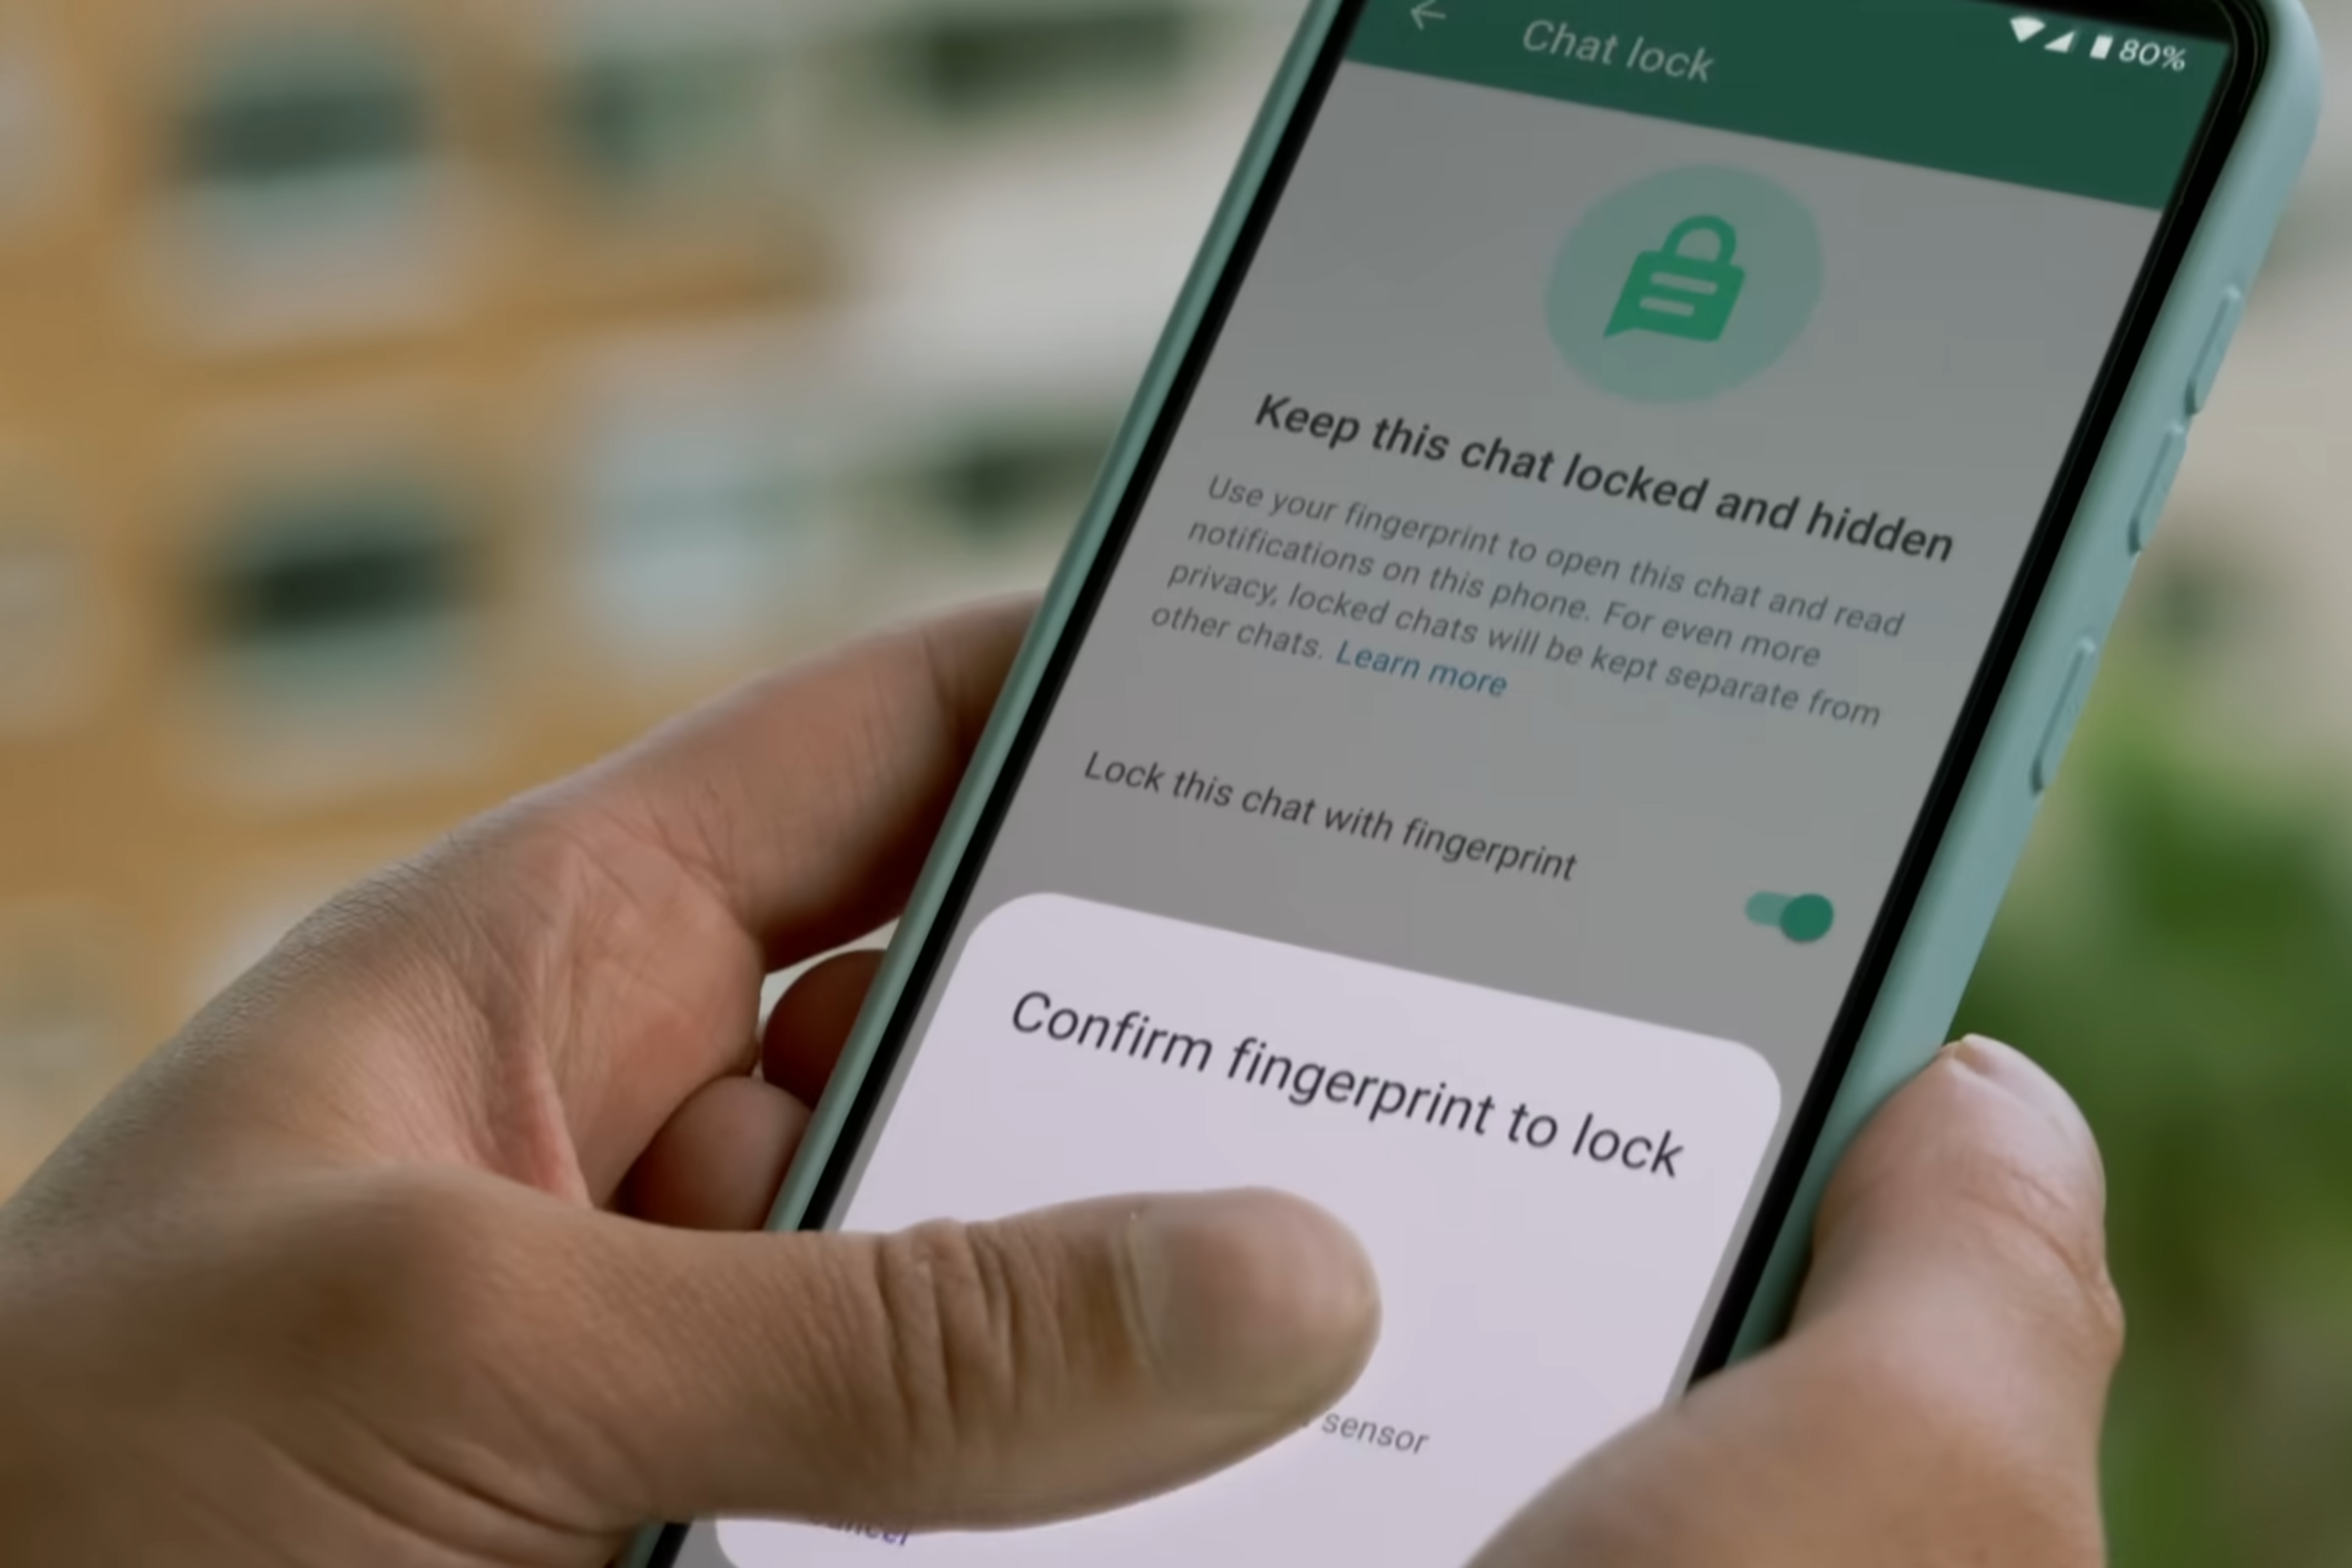 WhatsApp’s Chat Lock lets you secure conversations behind a password or biometrics